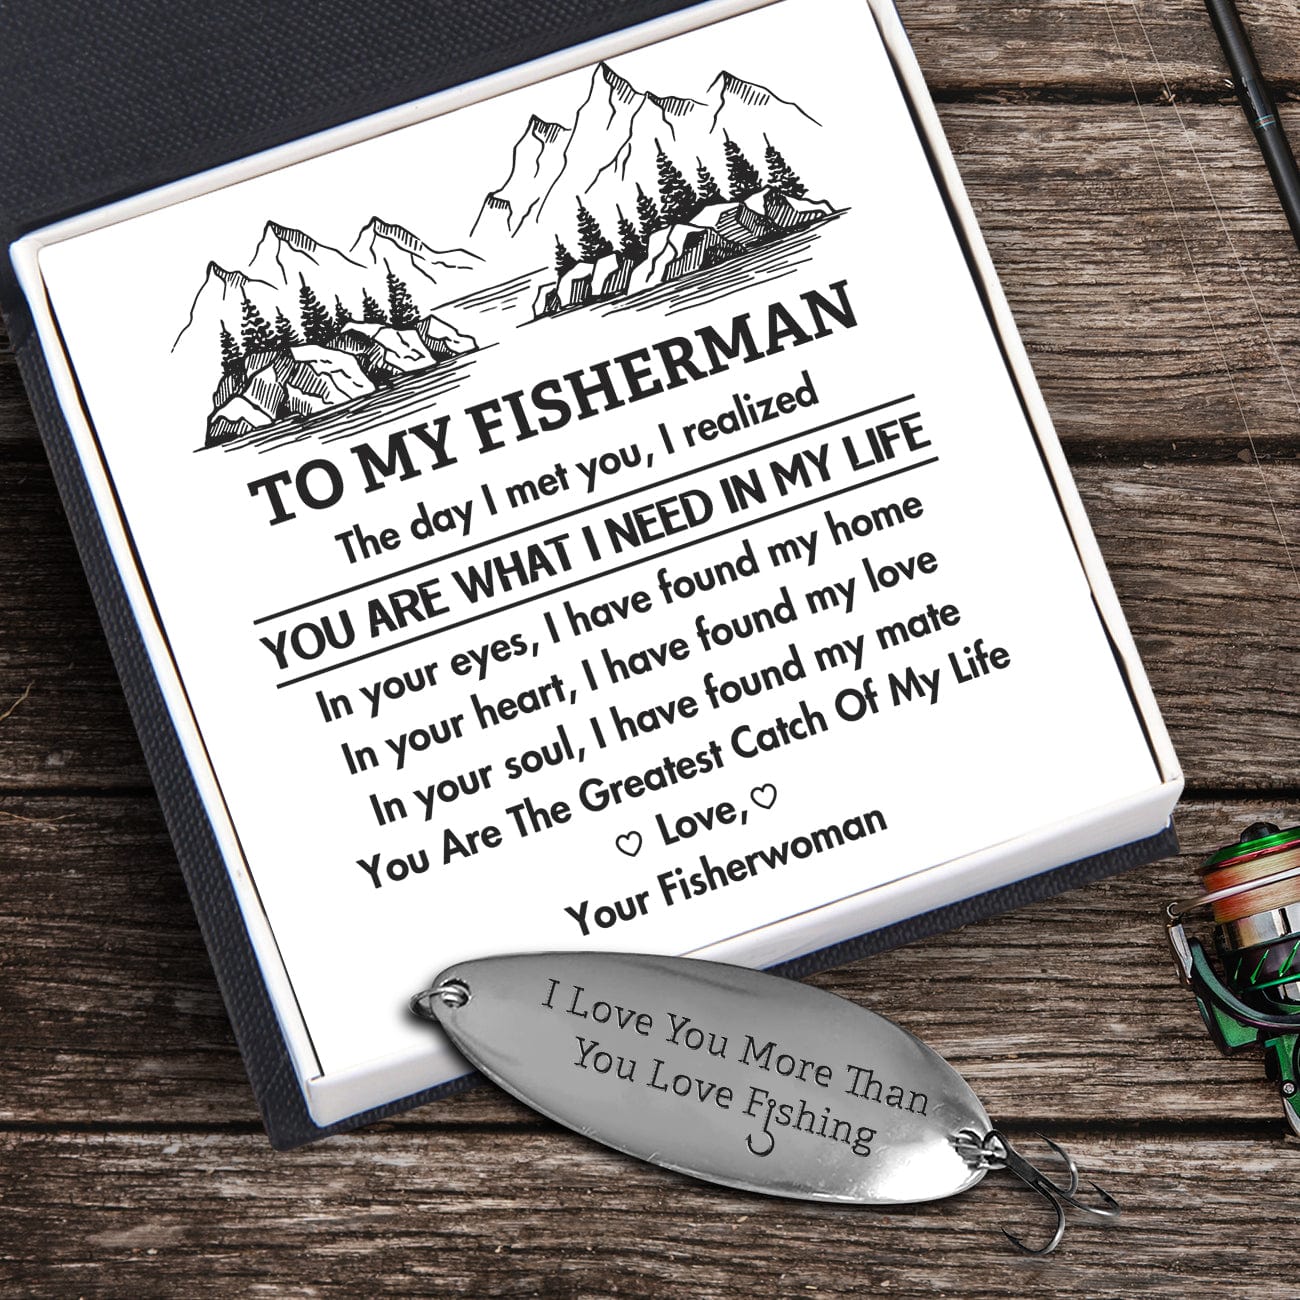 Fishing Lure - Fishing - To My Fisherman - You Are The Greatest Catch -  Wrapsify